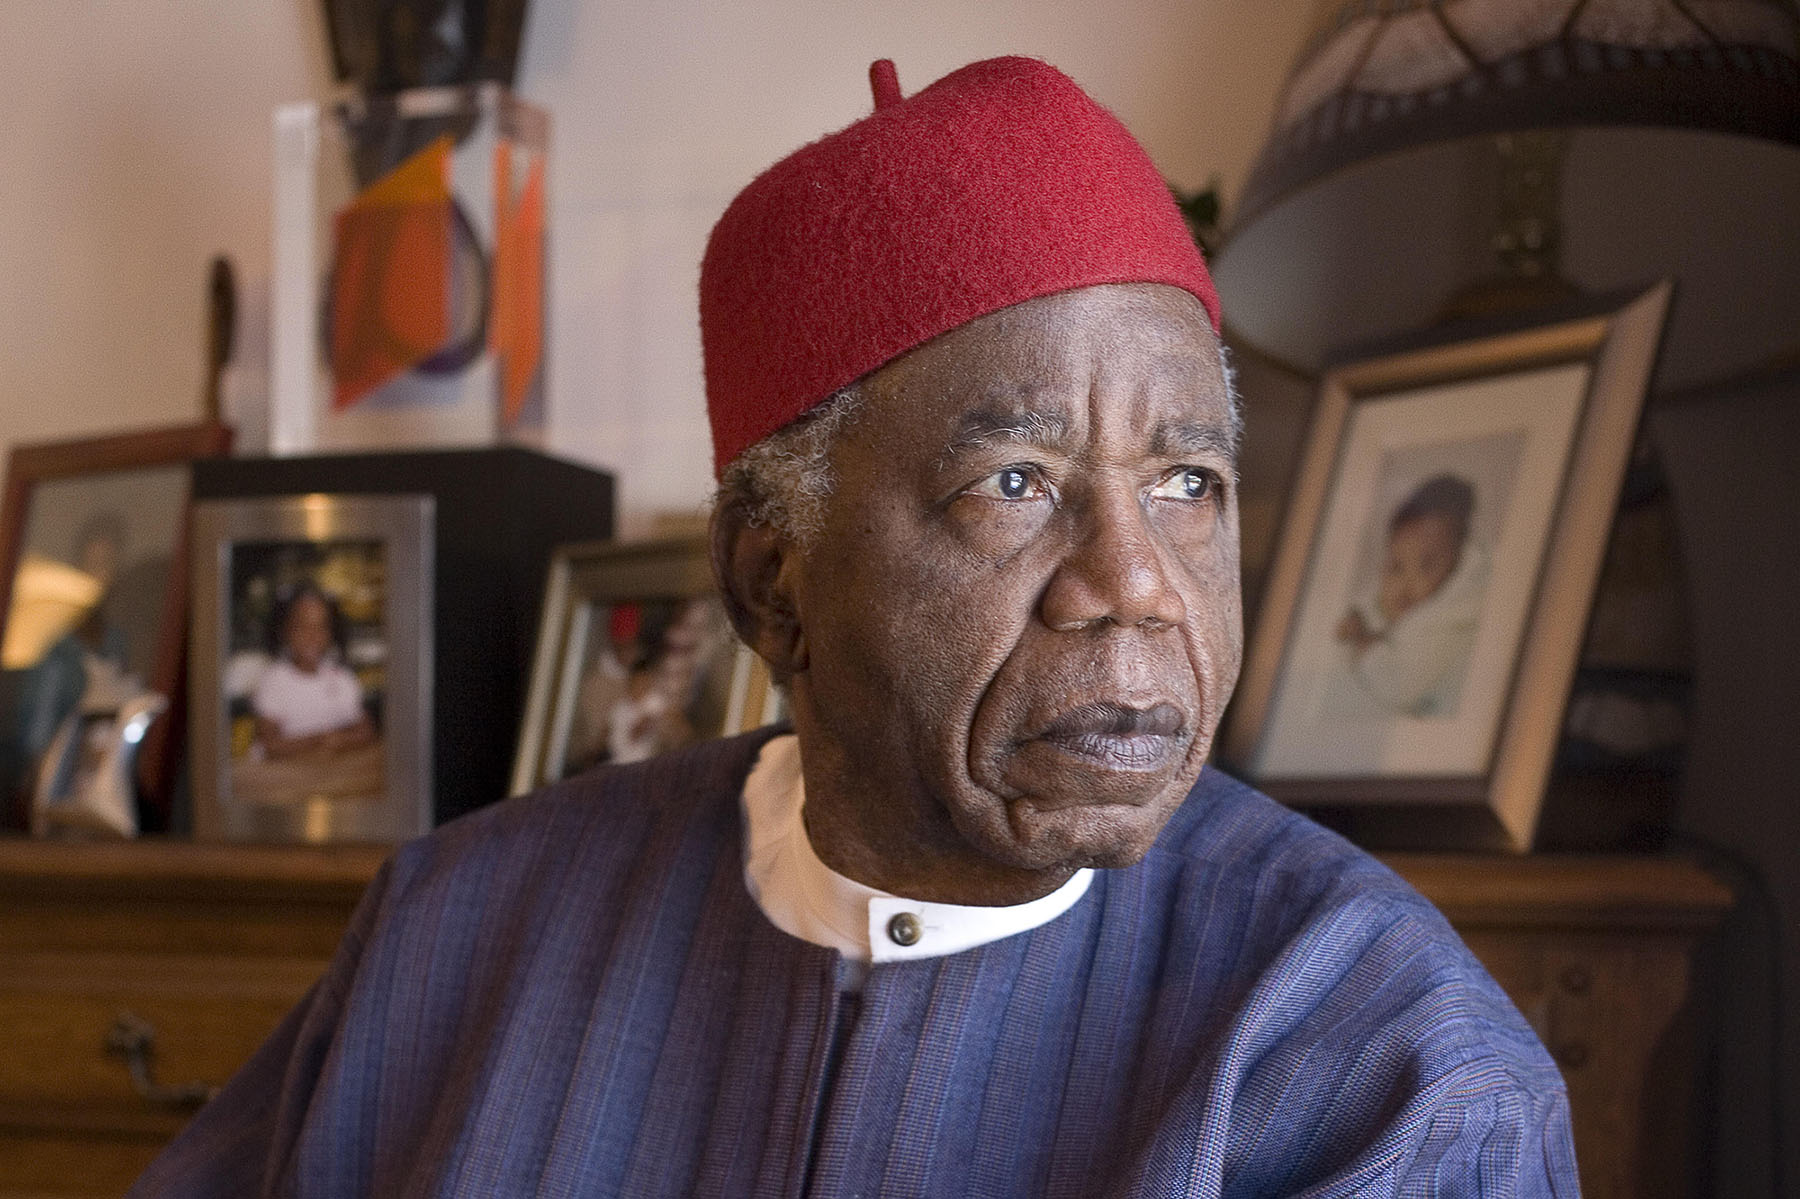 In Memory of Chinua Achebe, Bard College to Host Celebration of Contemporary African Writing on September 22